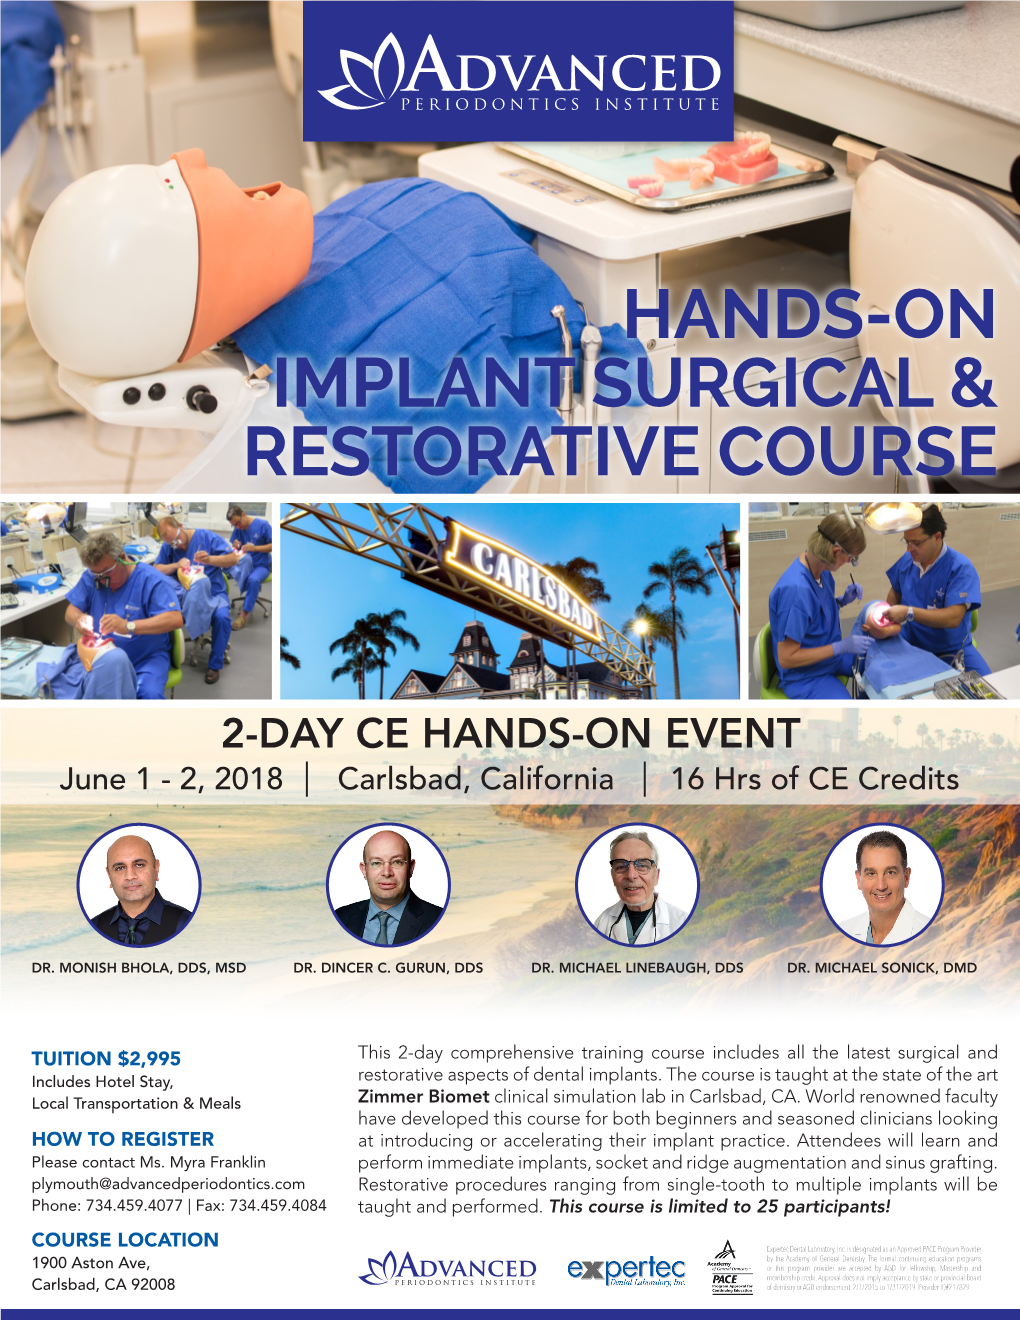 Hands-On Implant Surgical & Restorative Course